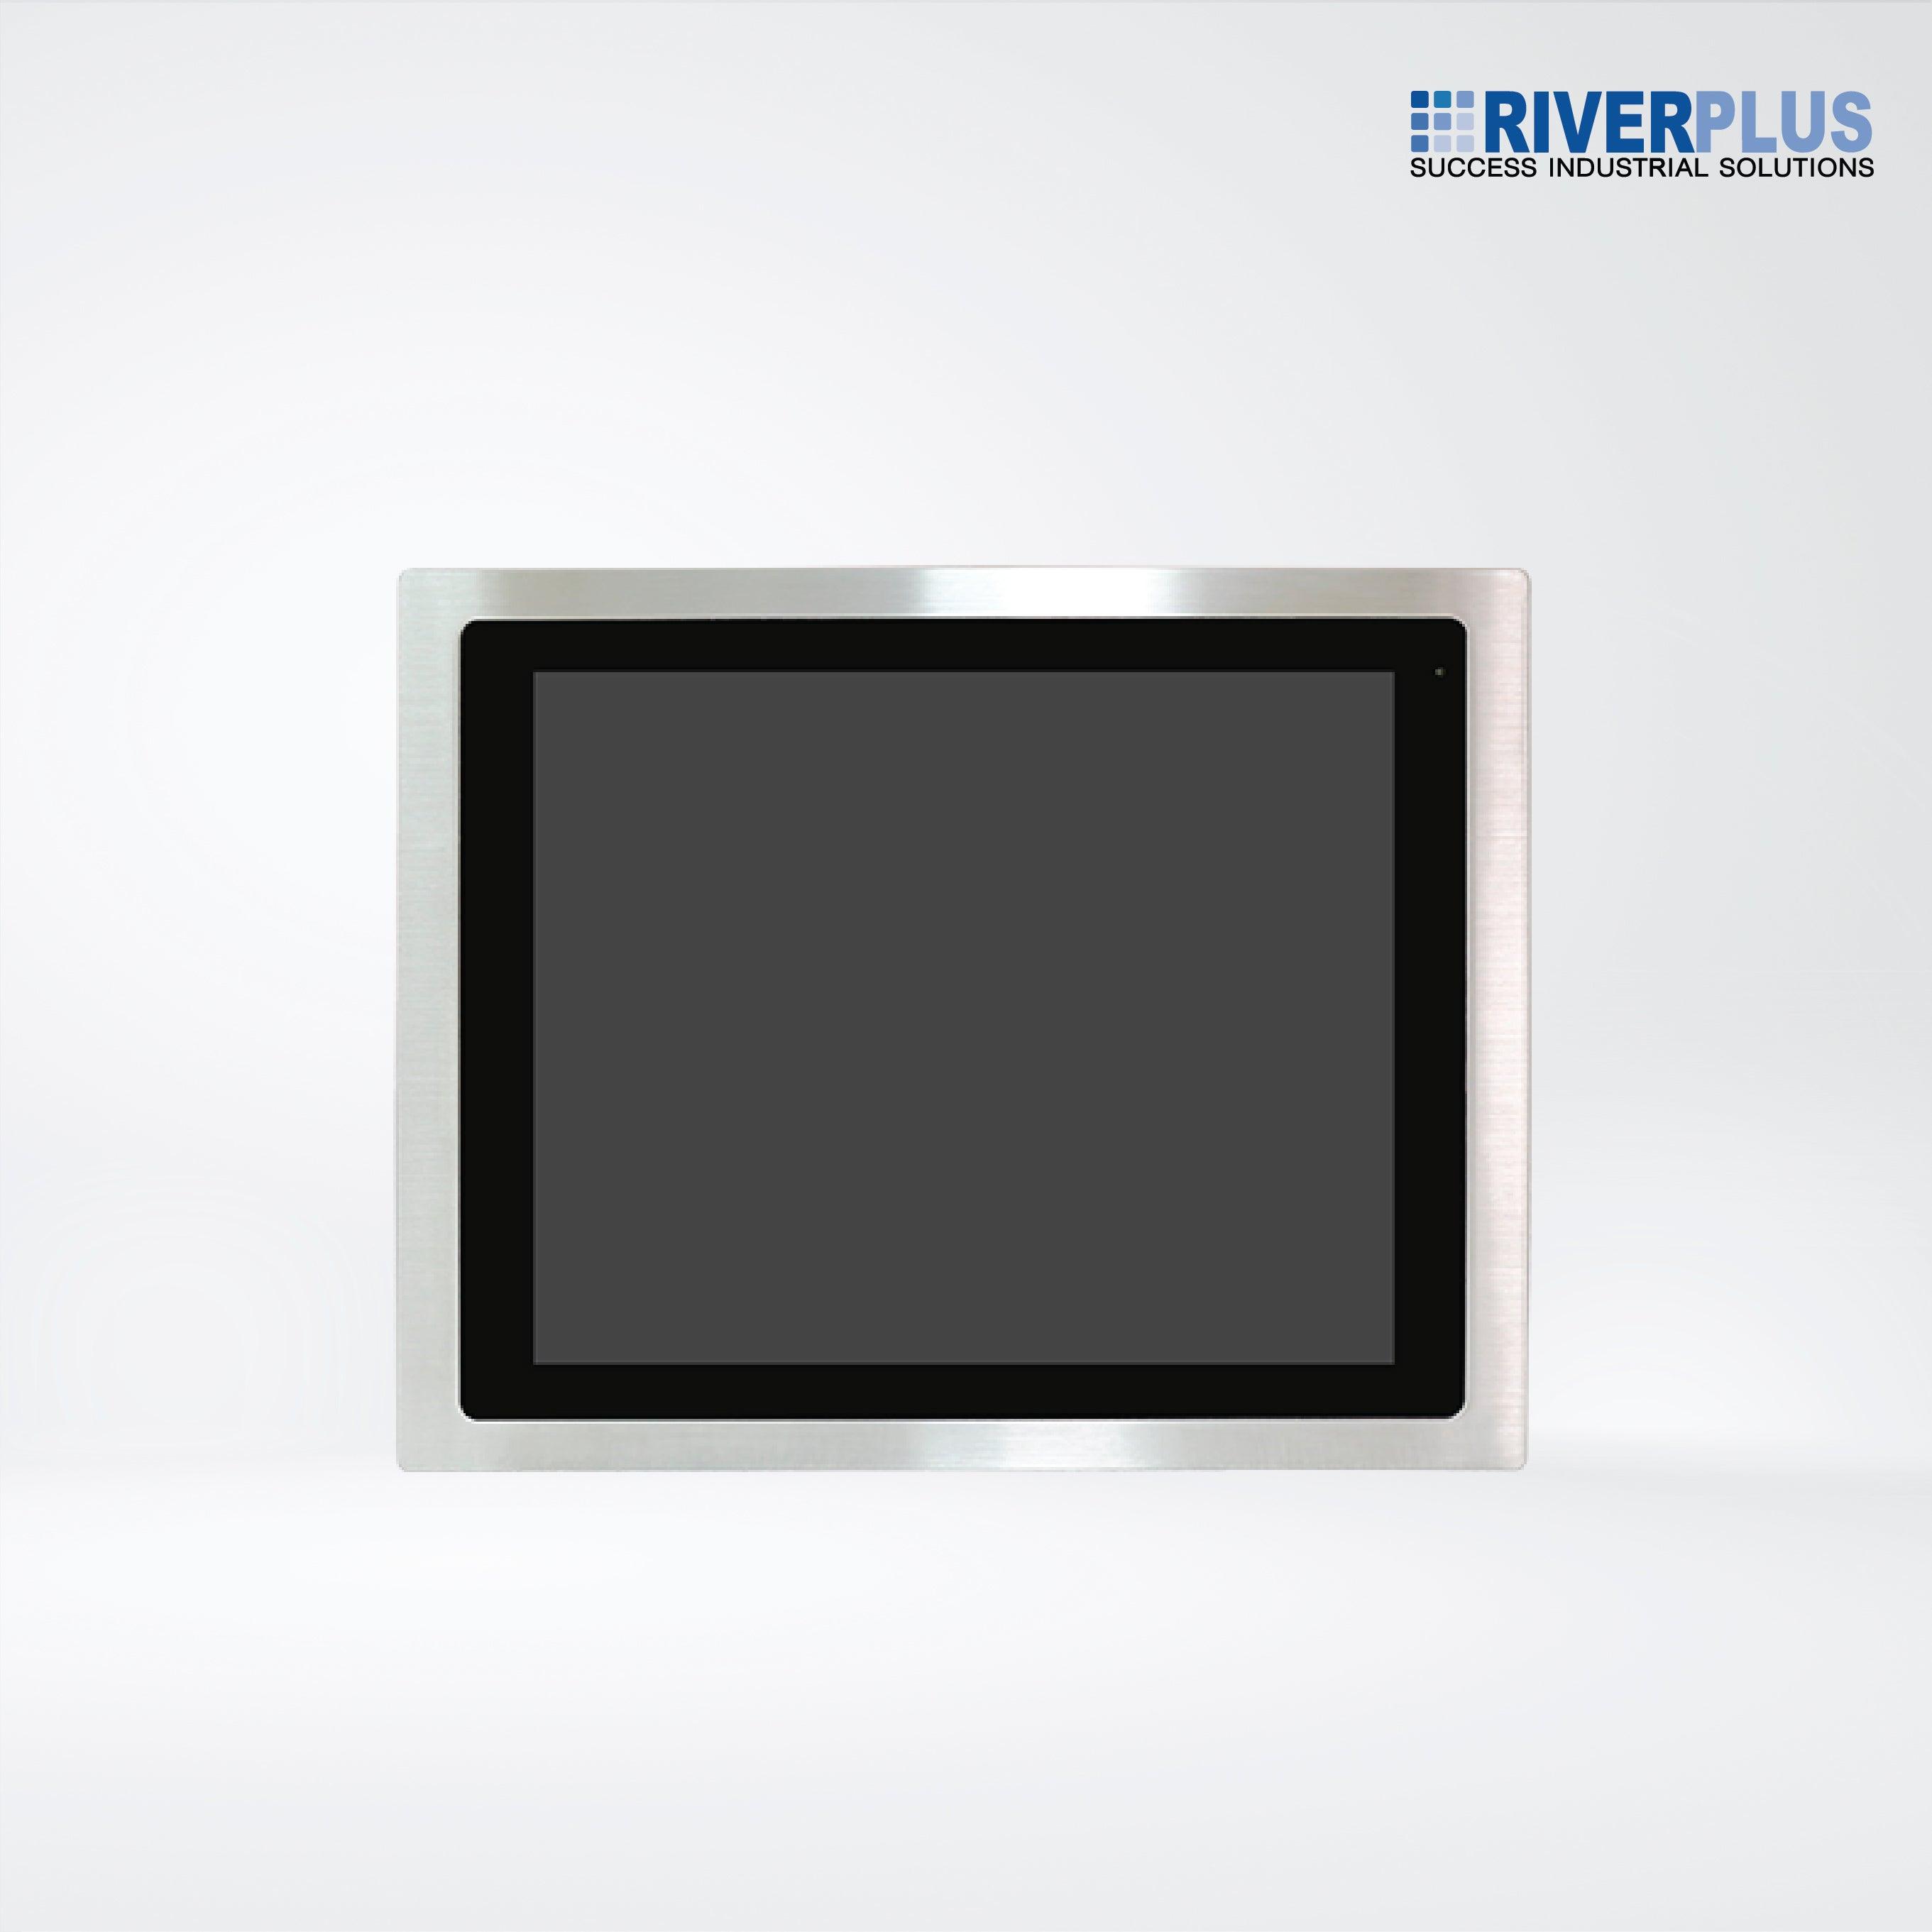 FABS-117R 17” Flat Front Panel IP66 Stainless Chassis Display - Riverplus